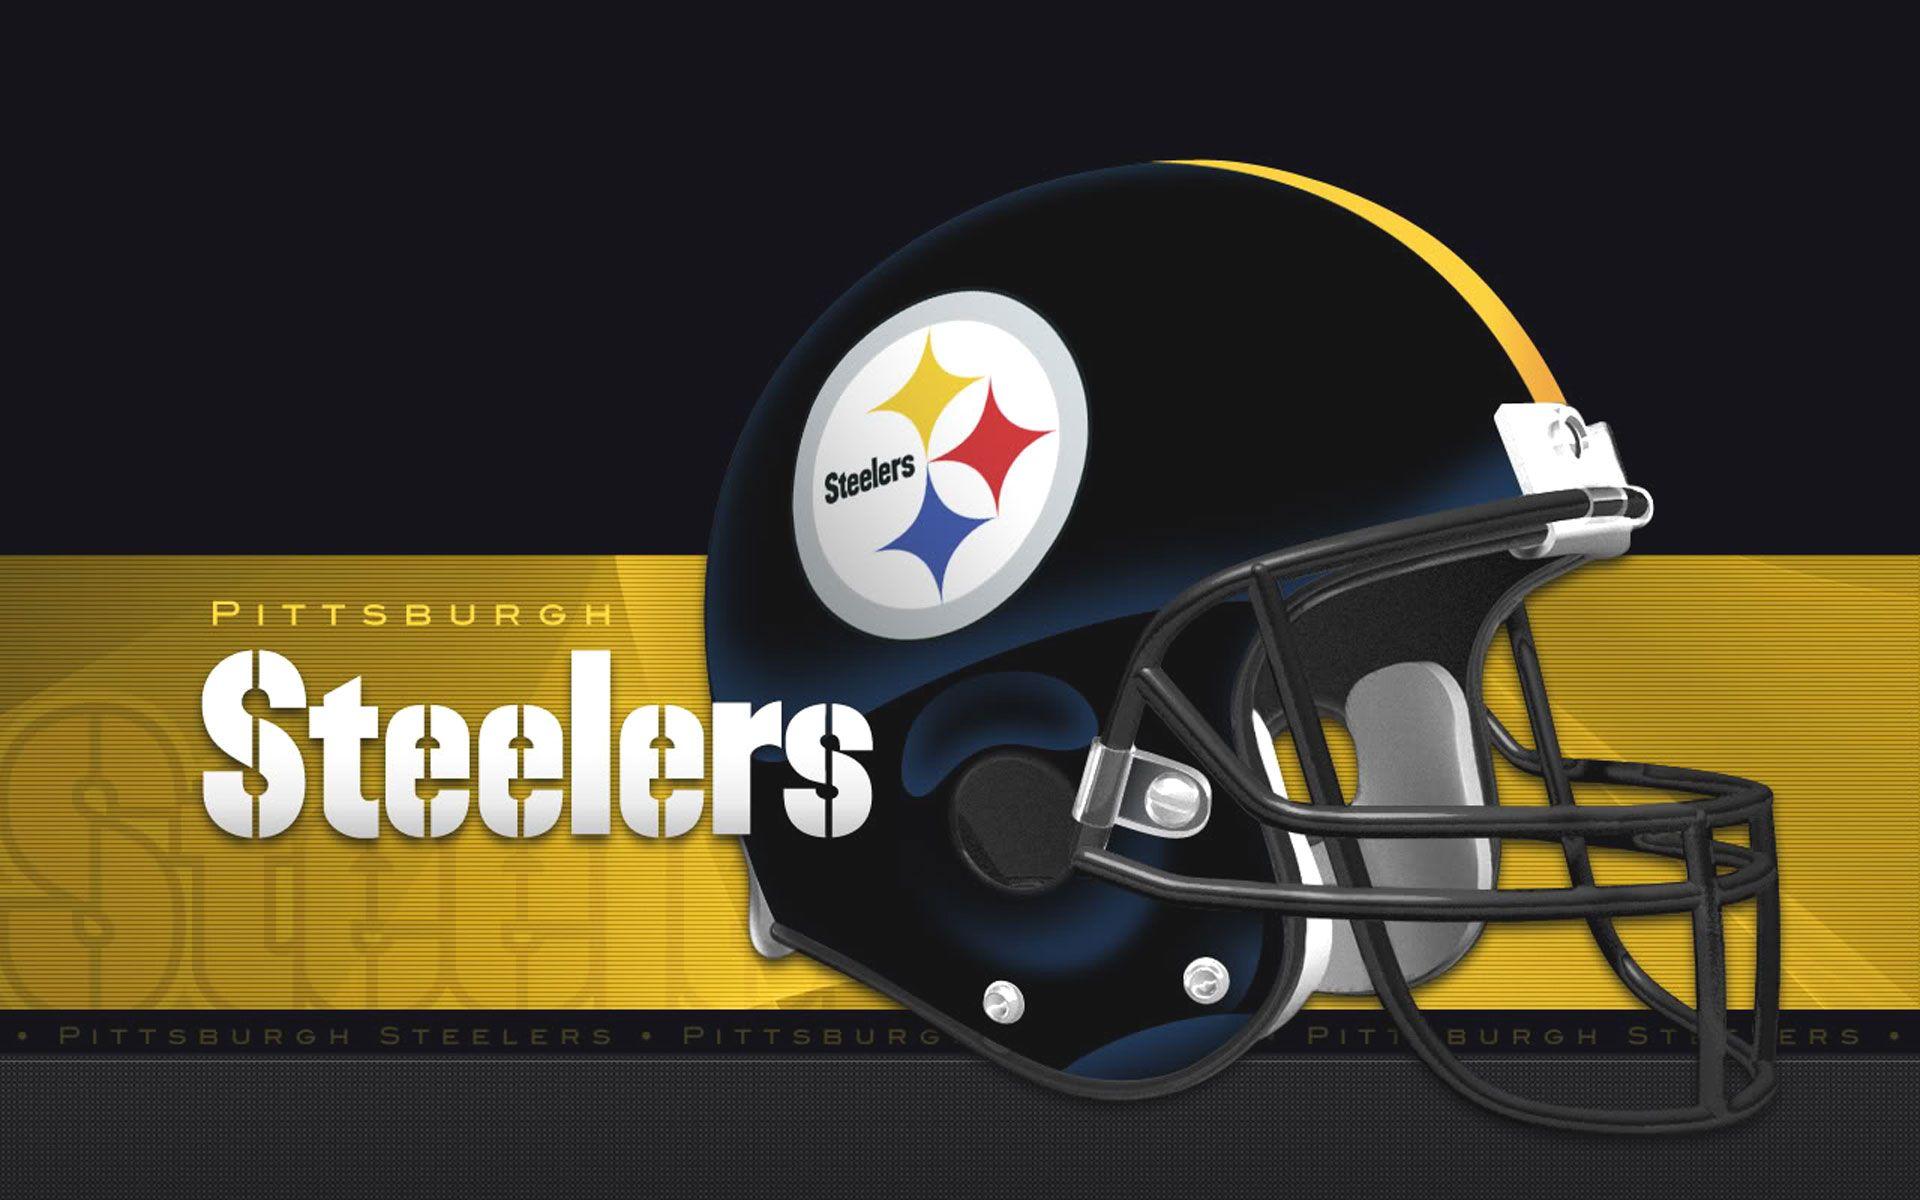 Pittsburgh Steelers / Nfl 1920x1200 Wide Image